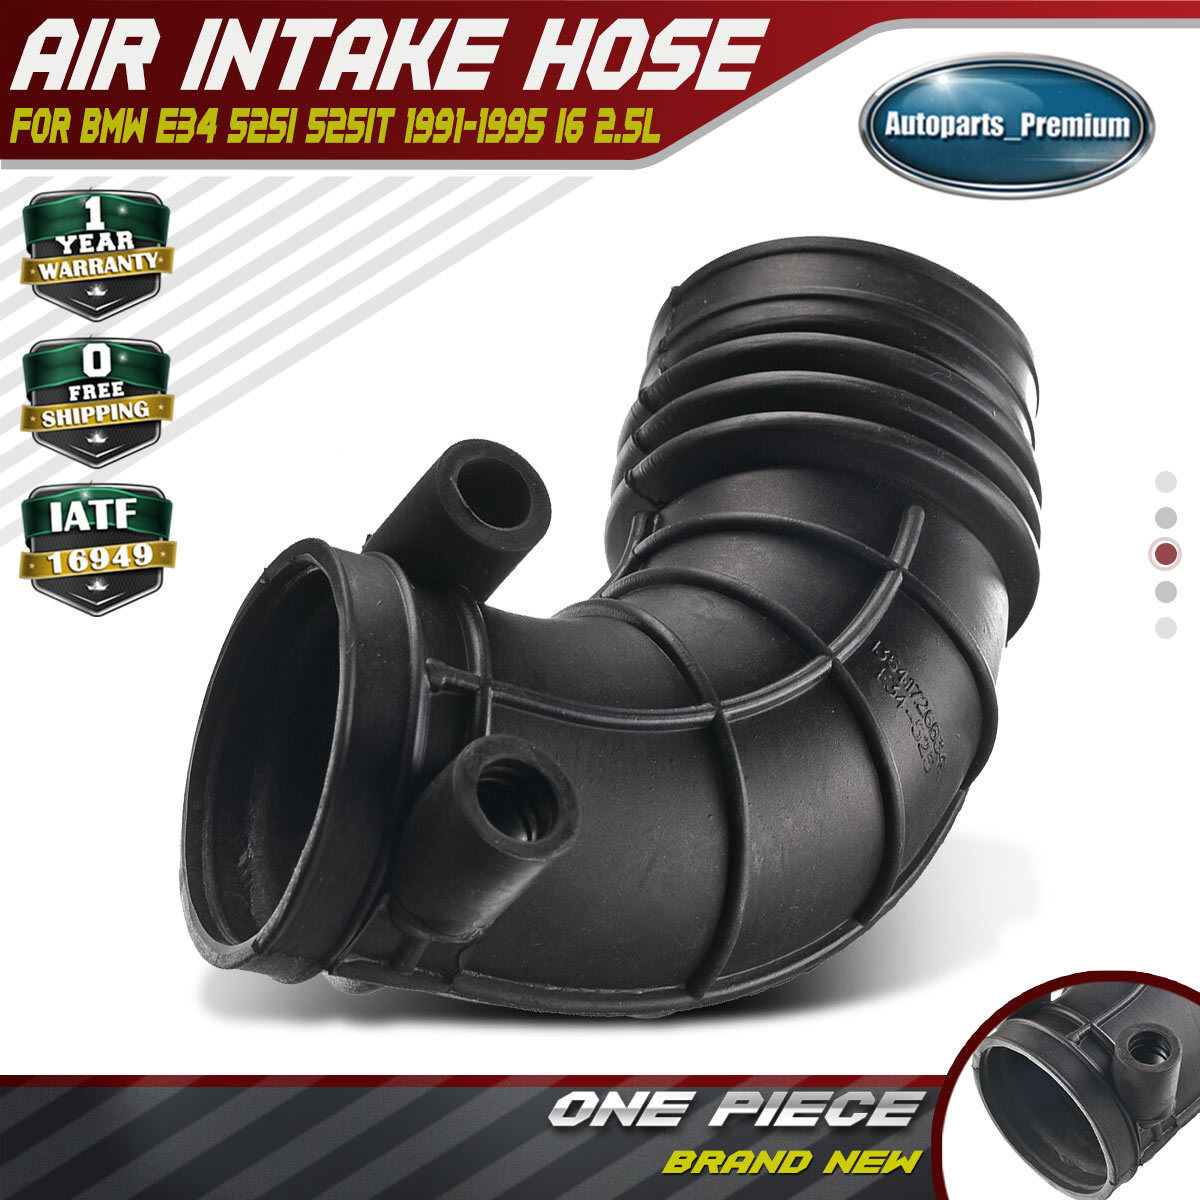 Air Flow Meter Boot Intake Hose to Throttle for BMW E34 525i 525iT 1991-1995 M50